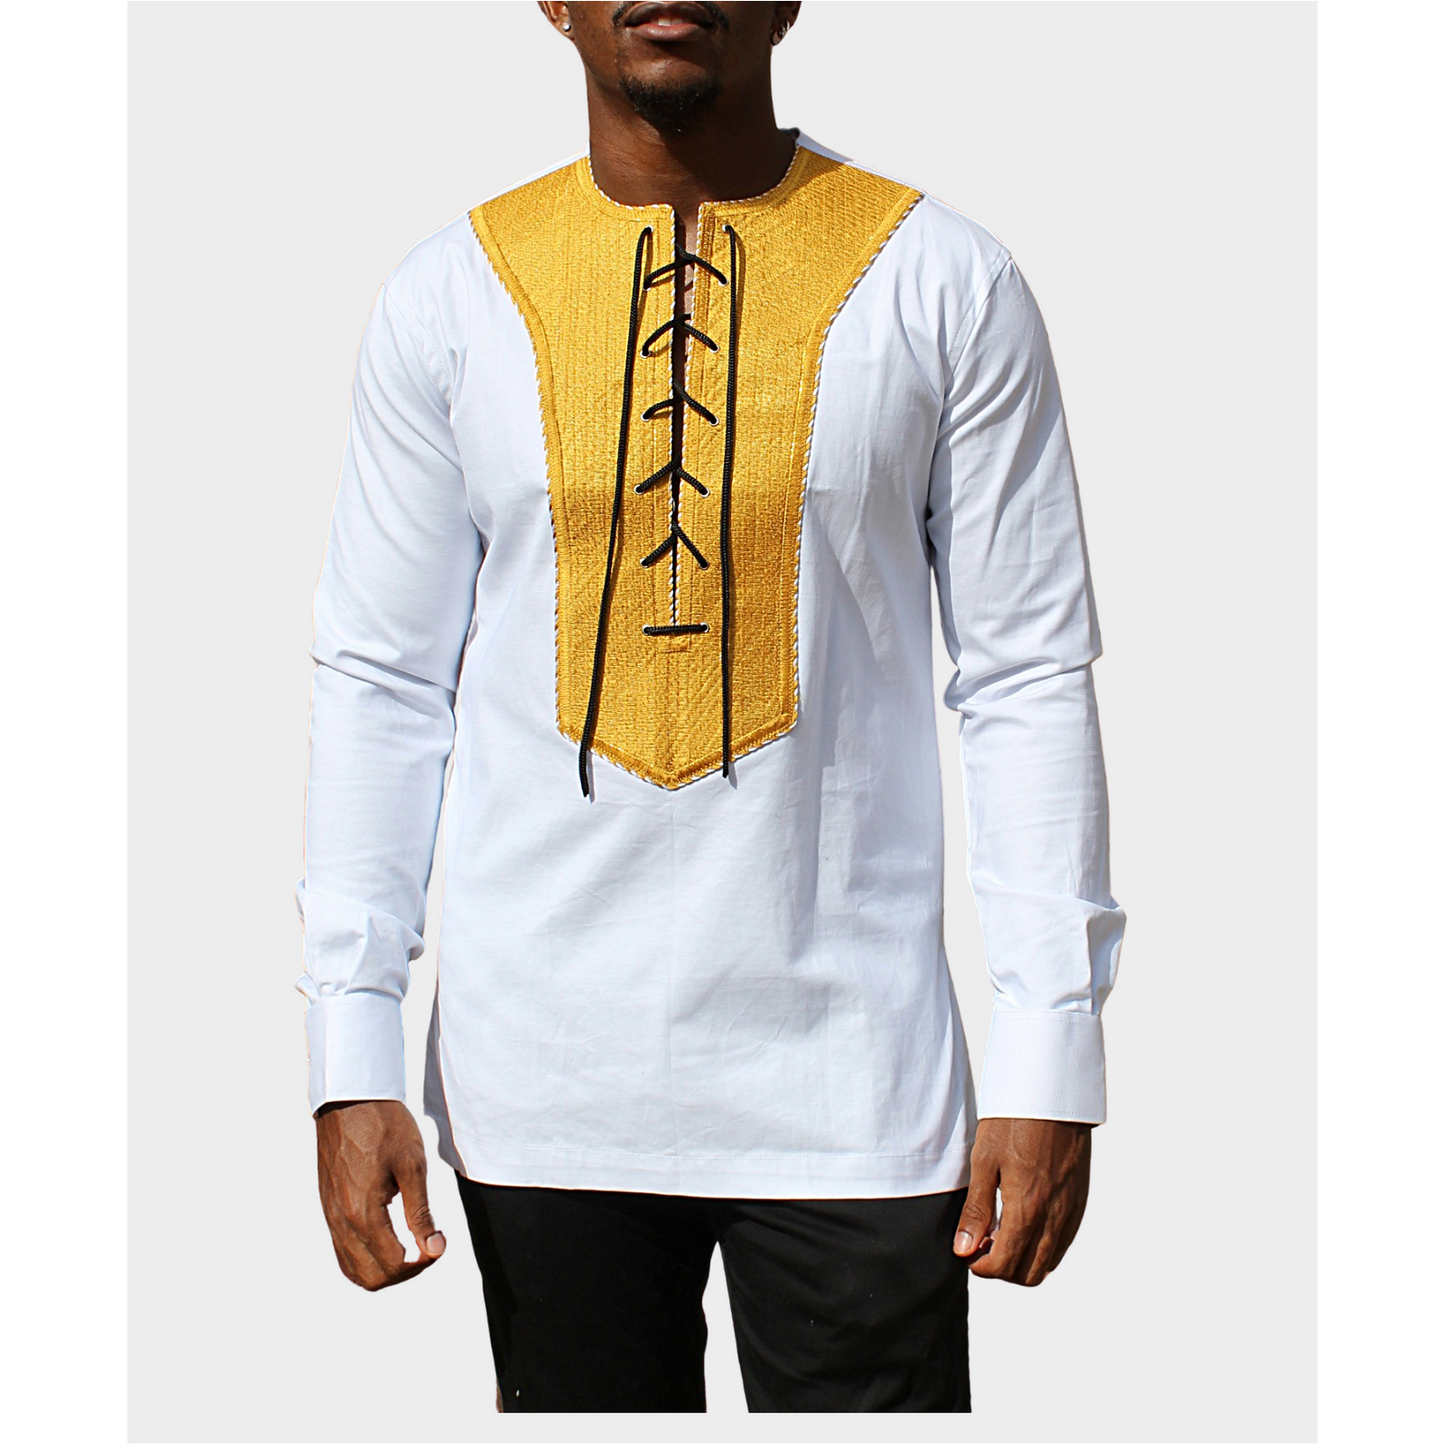 Men's Embroidered African Lace Up Top - White